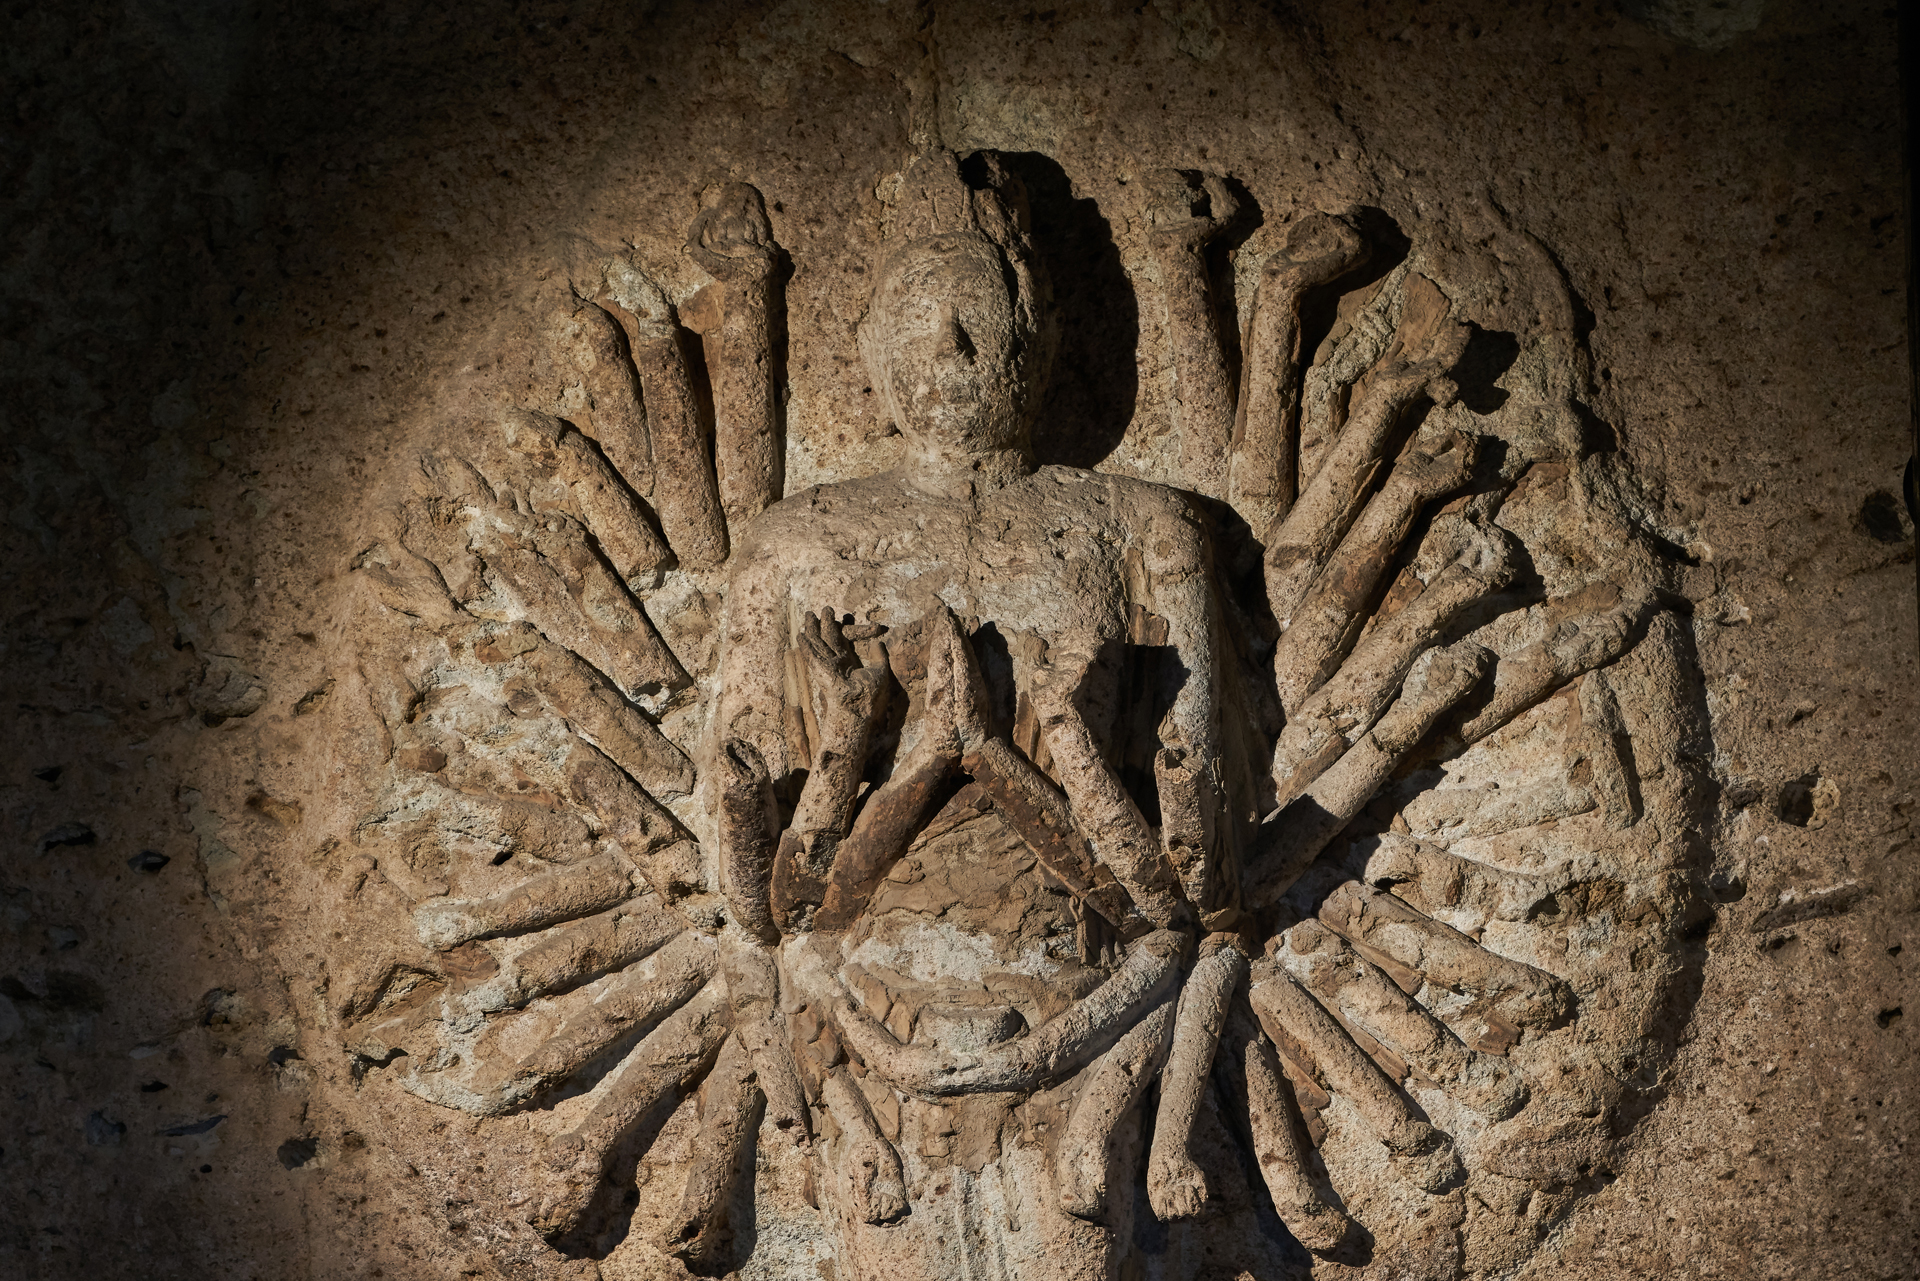 Oya Magaibutsu (carved Buddha images on a rock face)